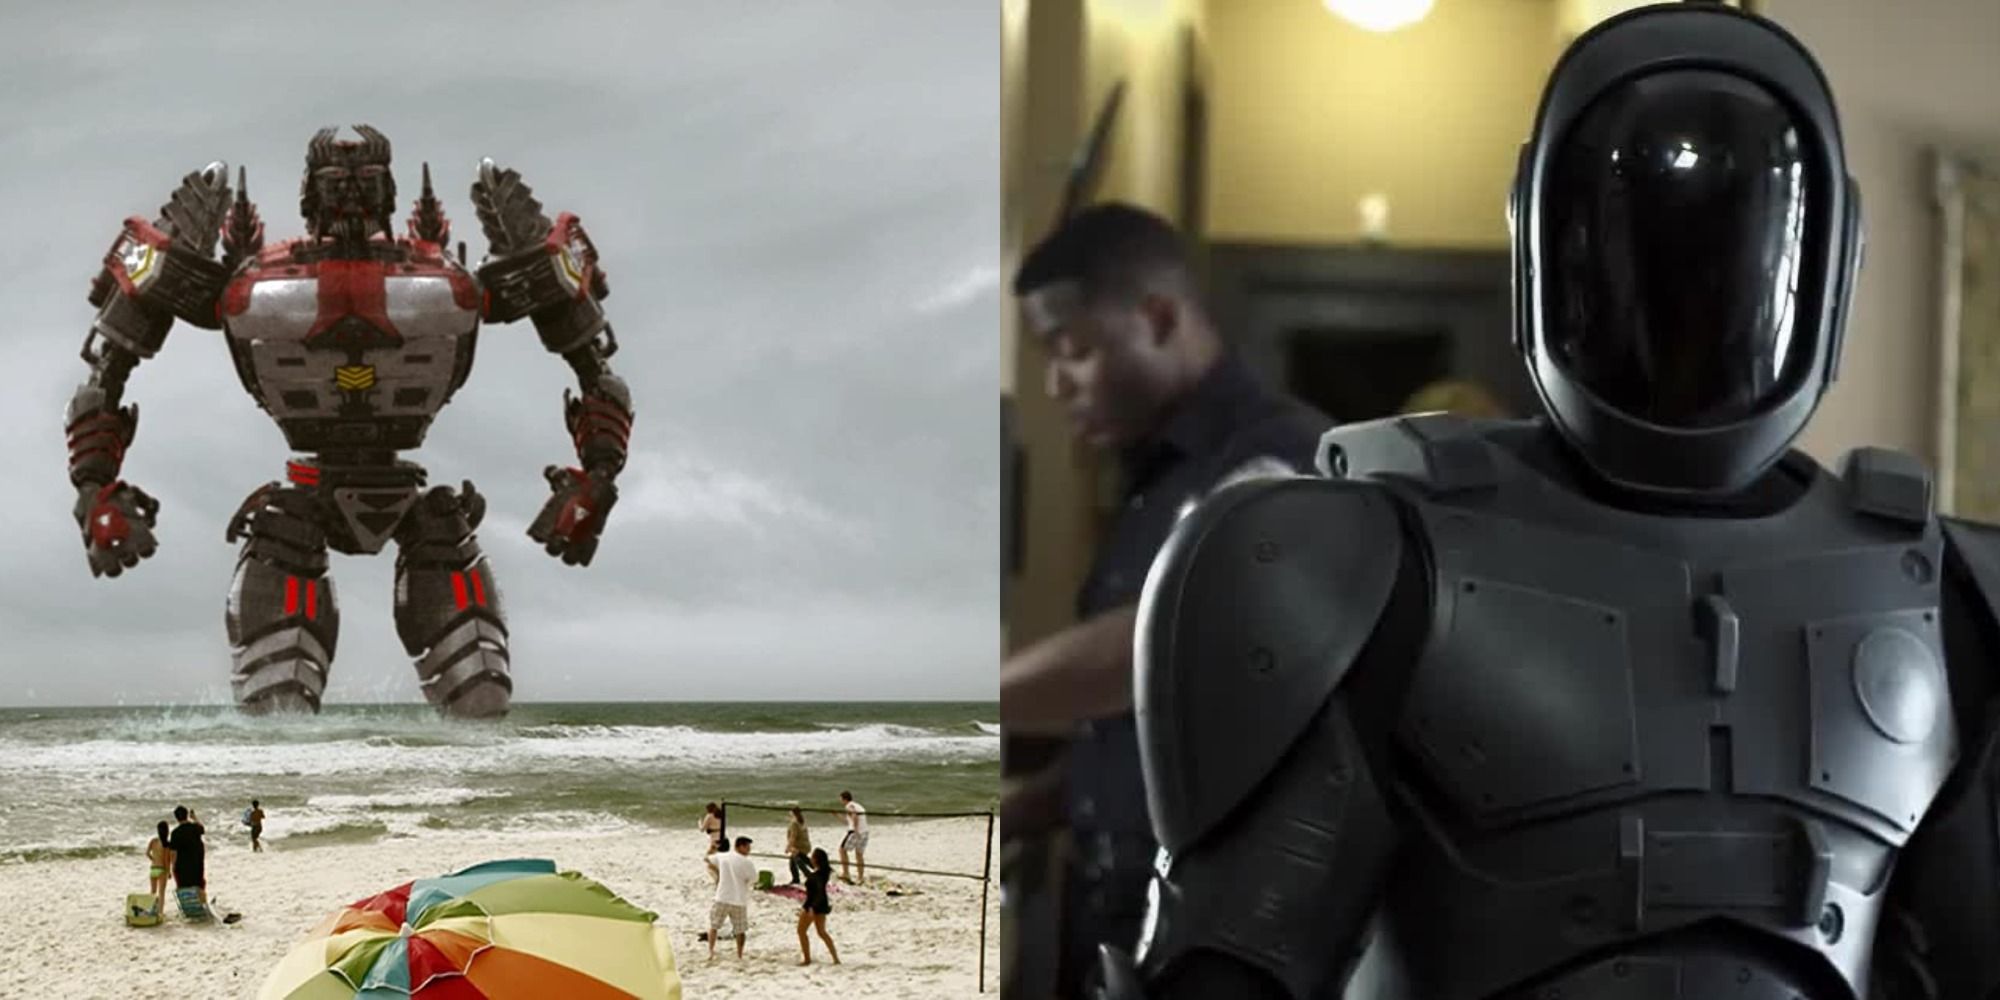 Great Low Budget Mockbusters – Android Cop and Pacific Rim